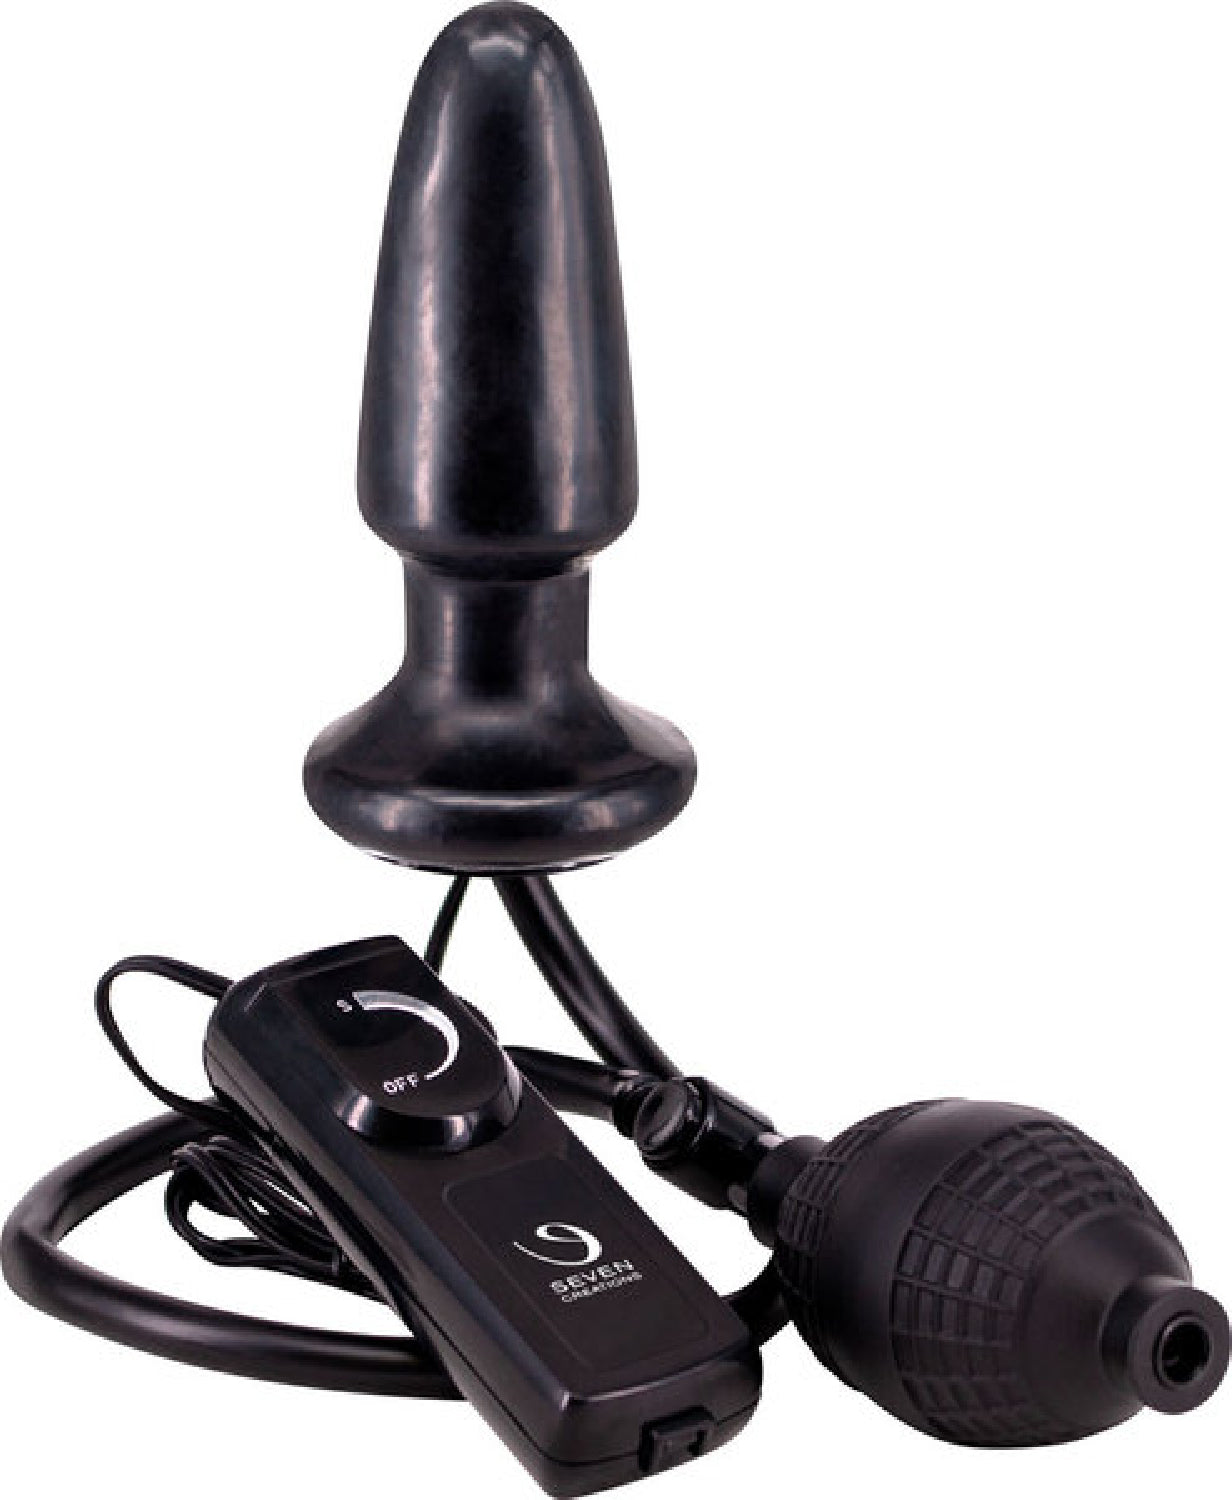 Fanny Hill'S Inflatable And Vibrating Butt Plug With Hand Pump (Black)  - Club X